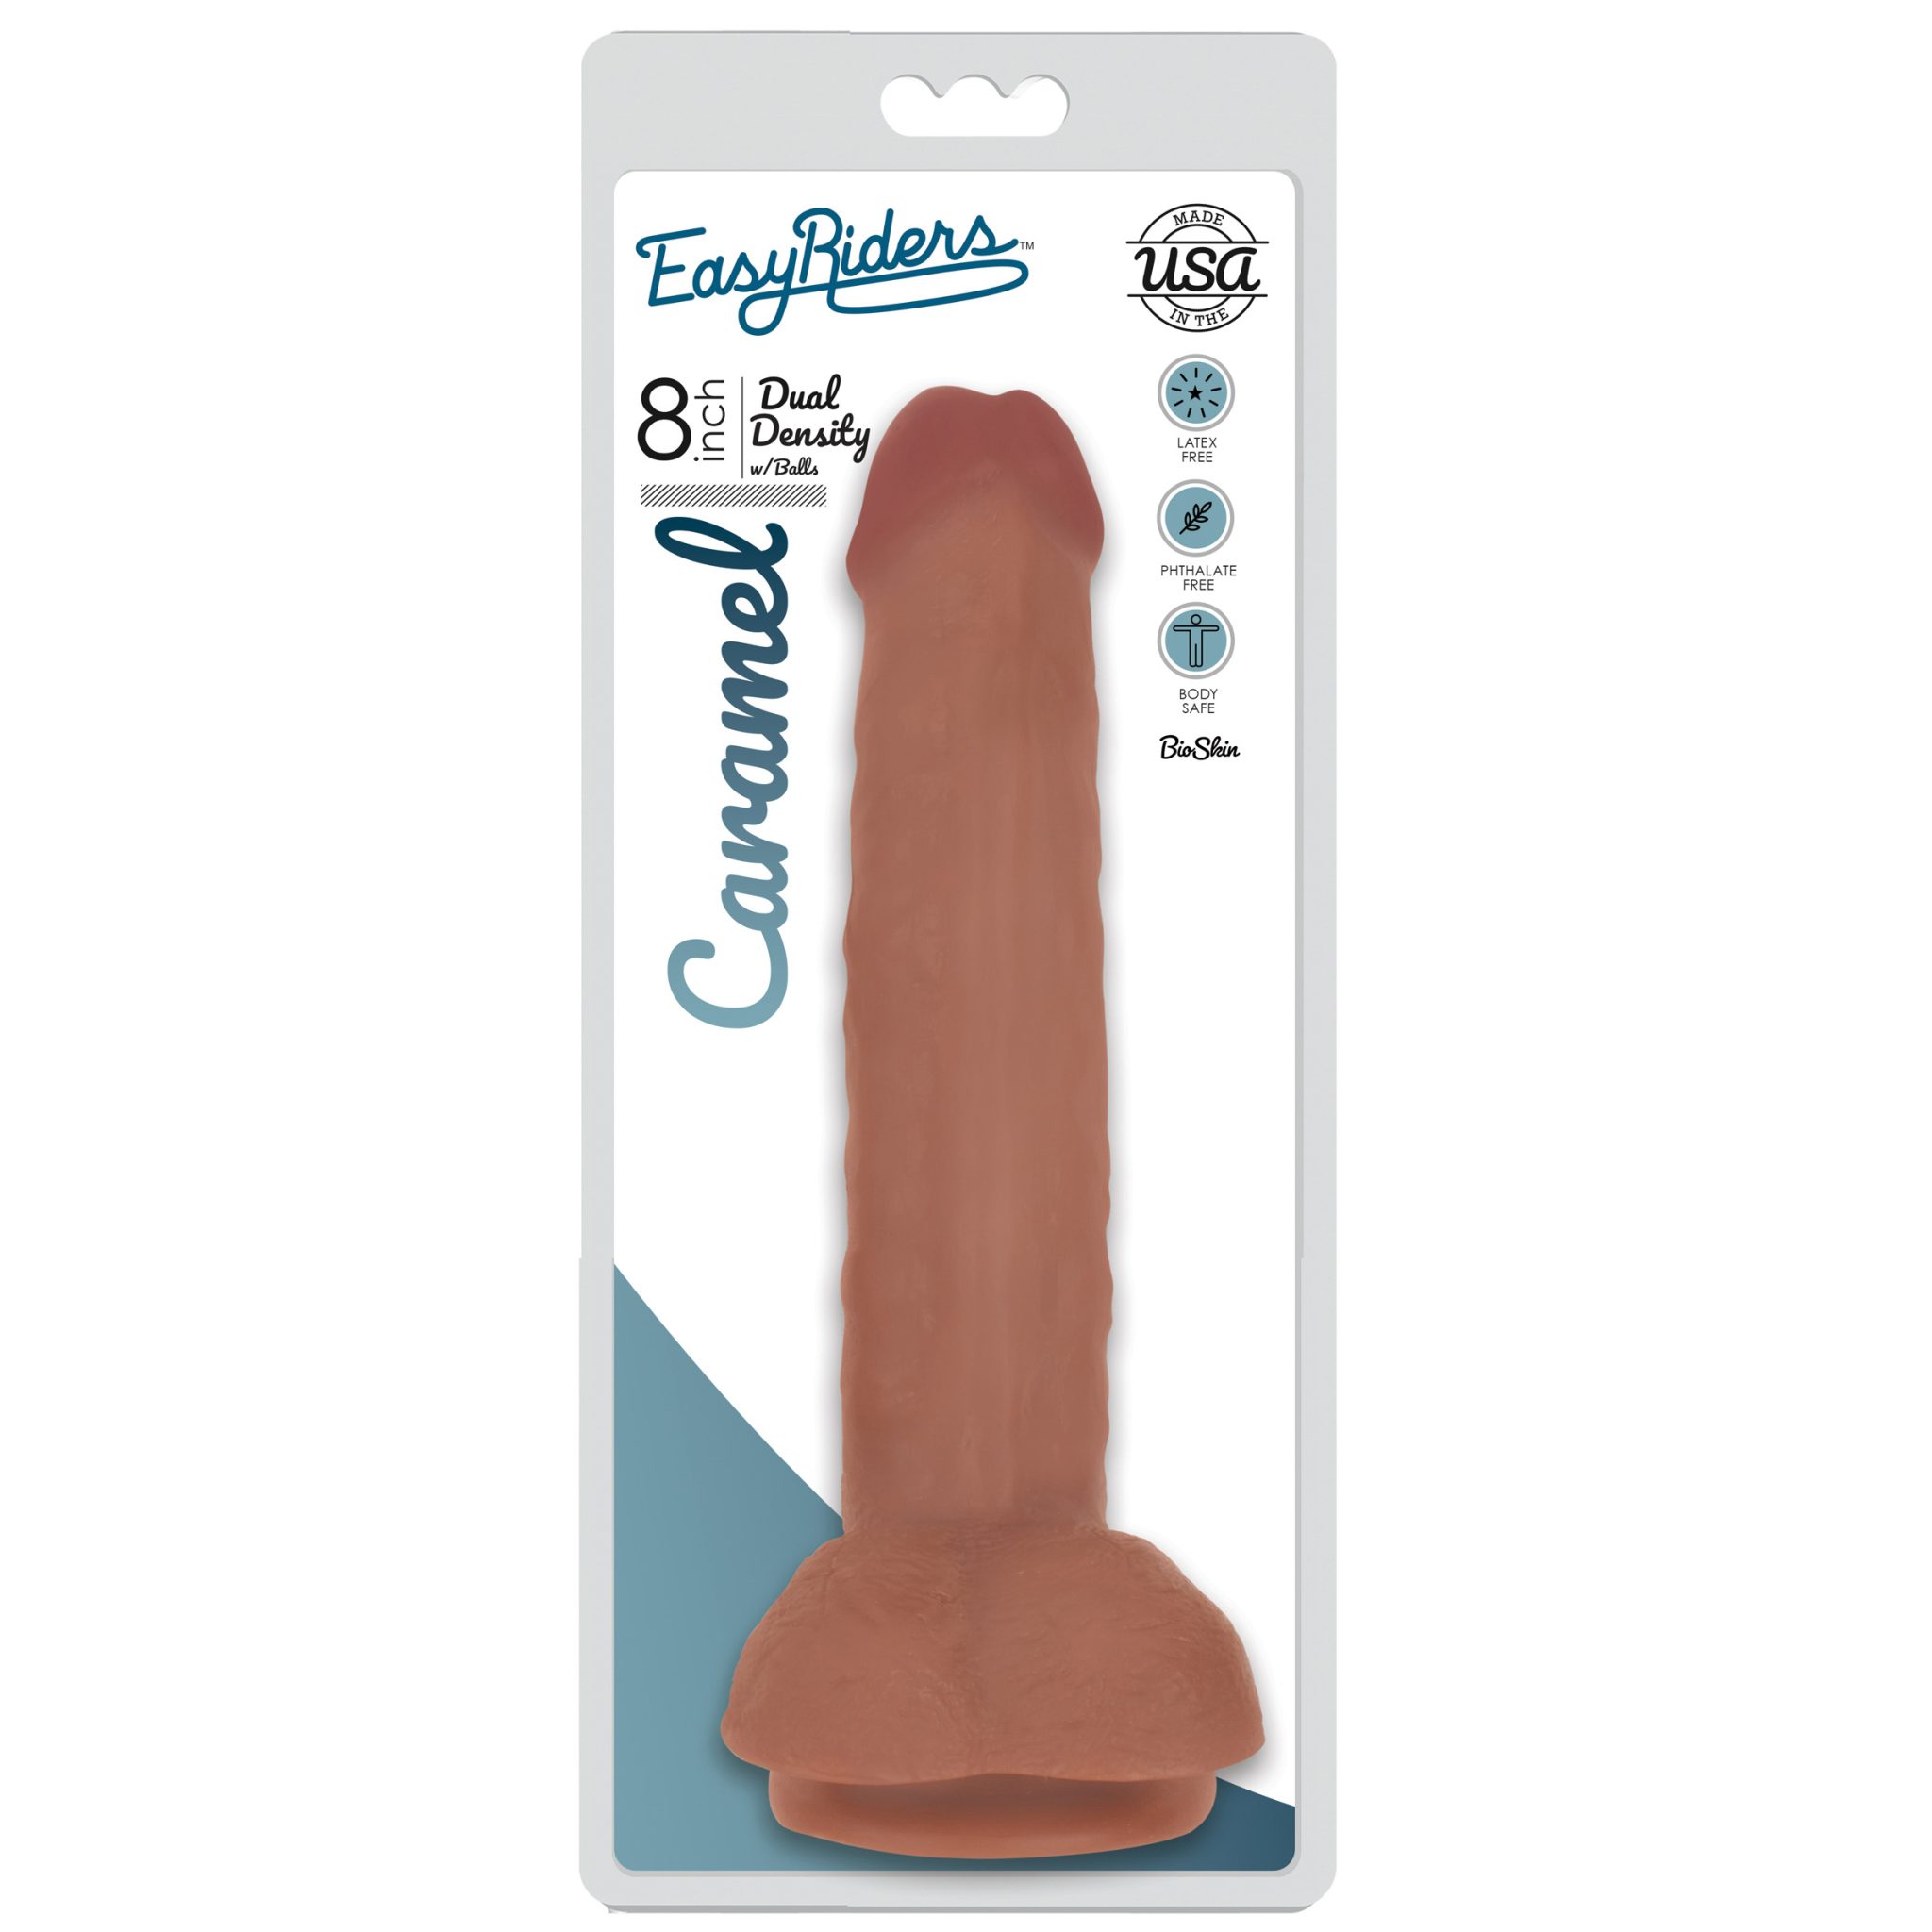 Easy Riders 8 Inch Dual Density Dildo With Balls – Tan